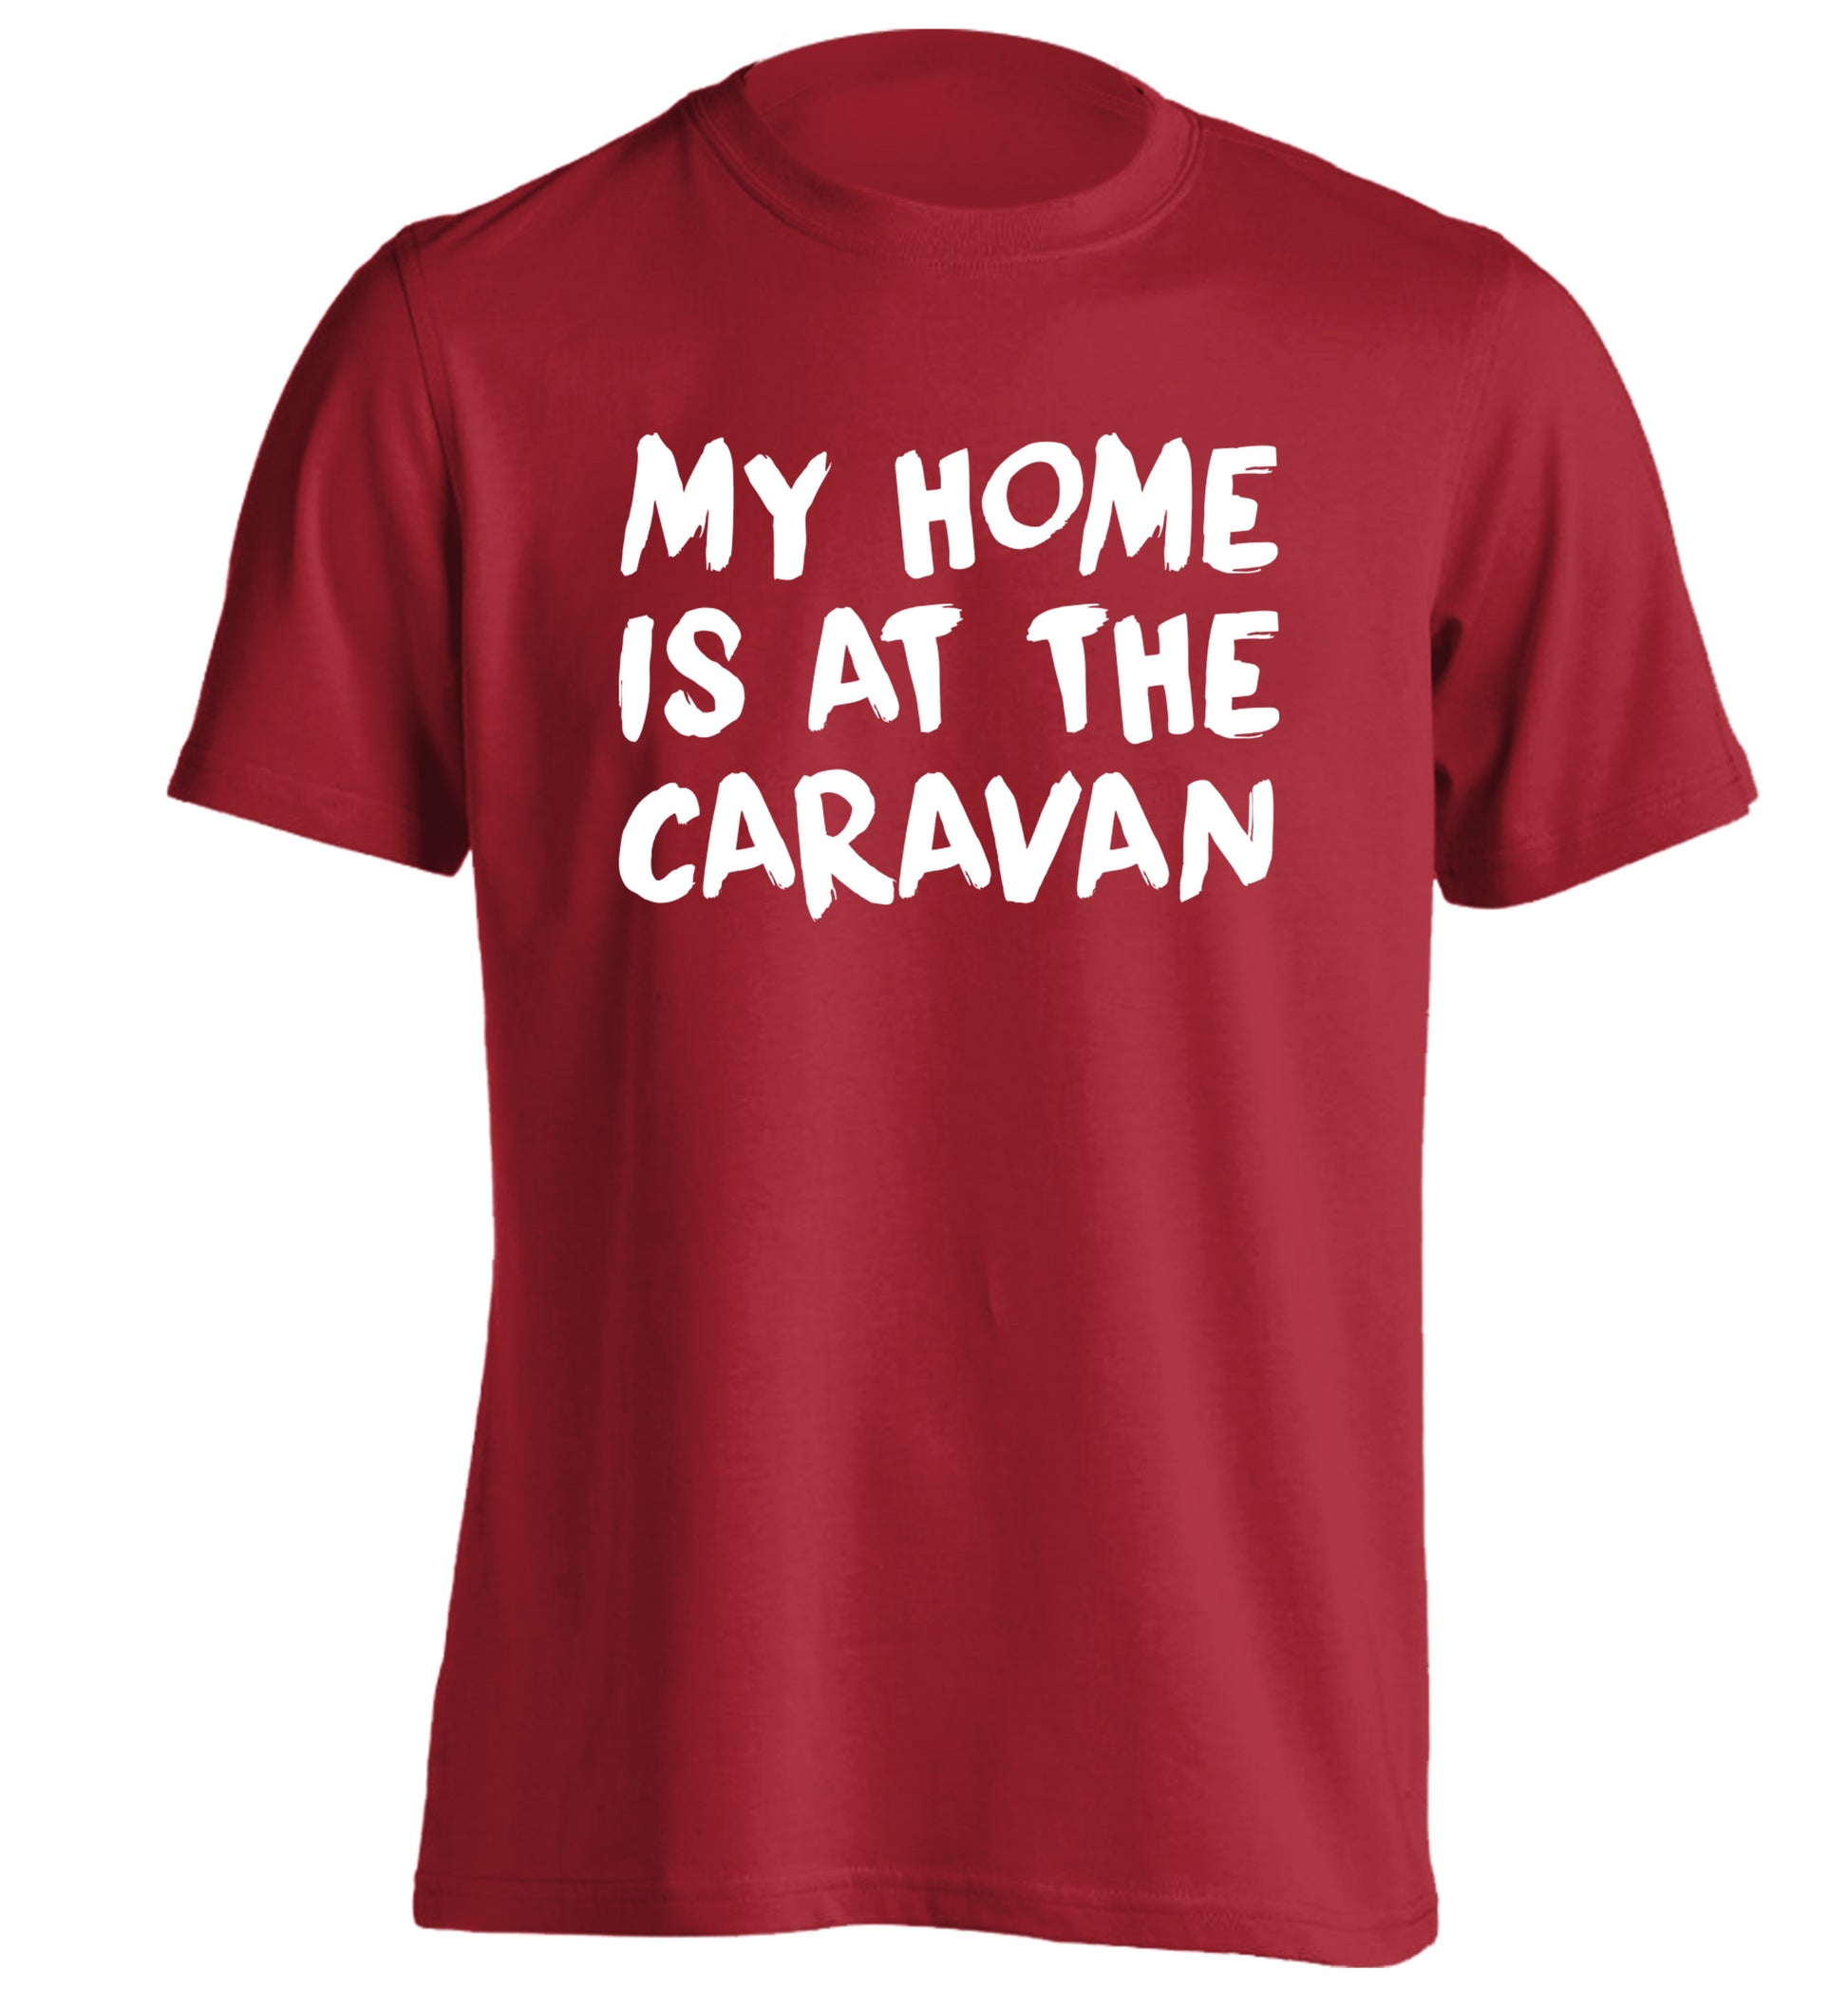 My home is at the caravan adults unisex red Tshirt 2XL